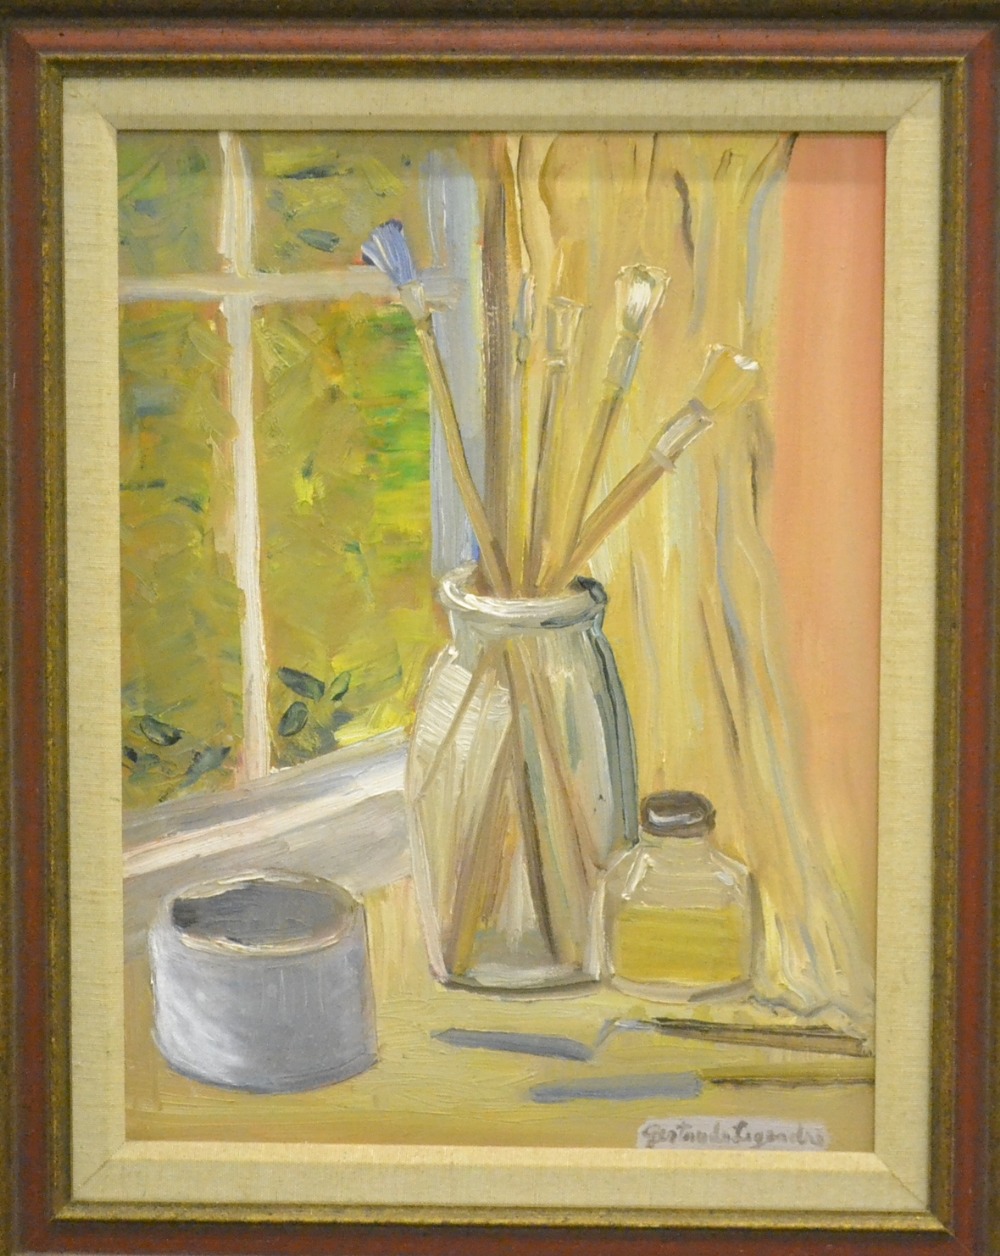 American School (20th century)
Still life of paintbrushes in a glass jar beside a window